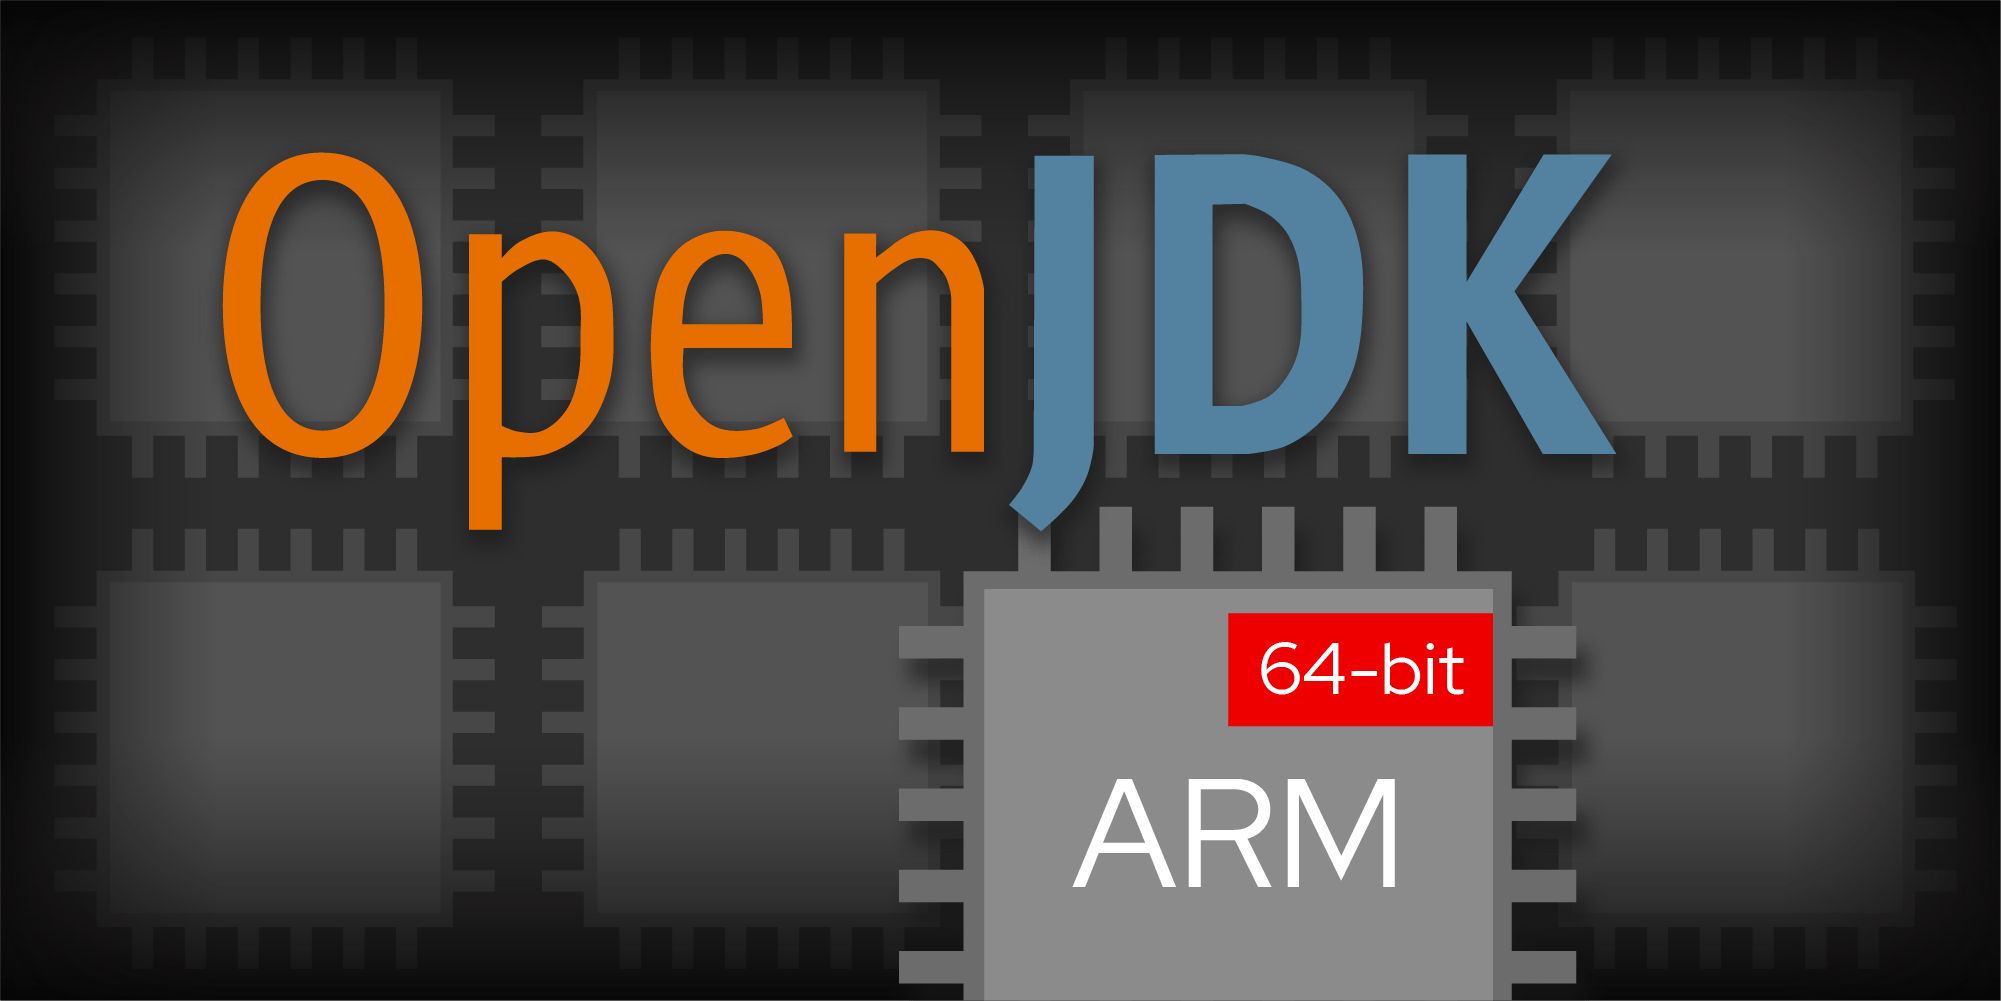 How Red Hat ported OpenJDK to 64-bit Arm: A community history